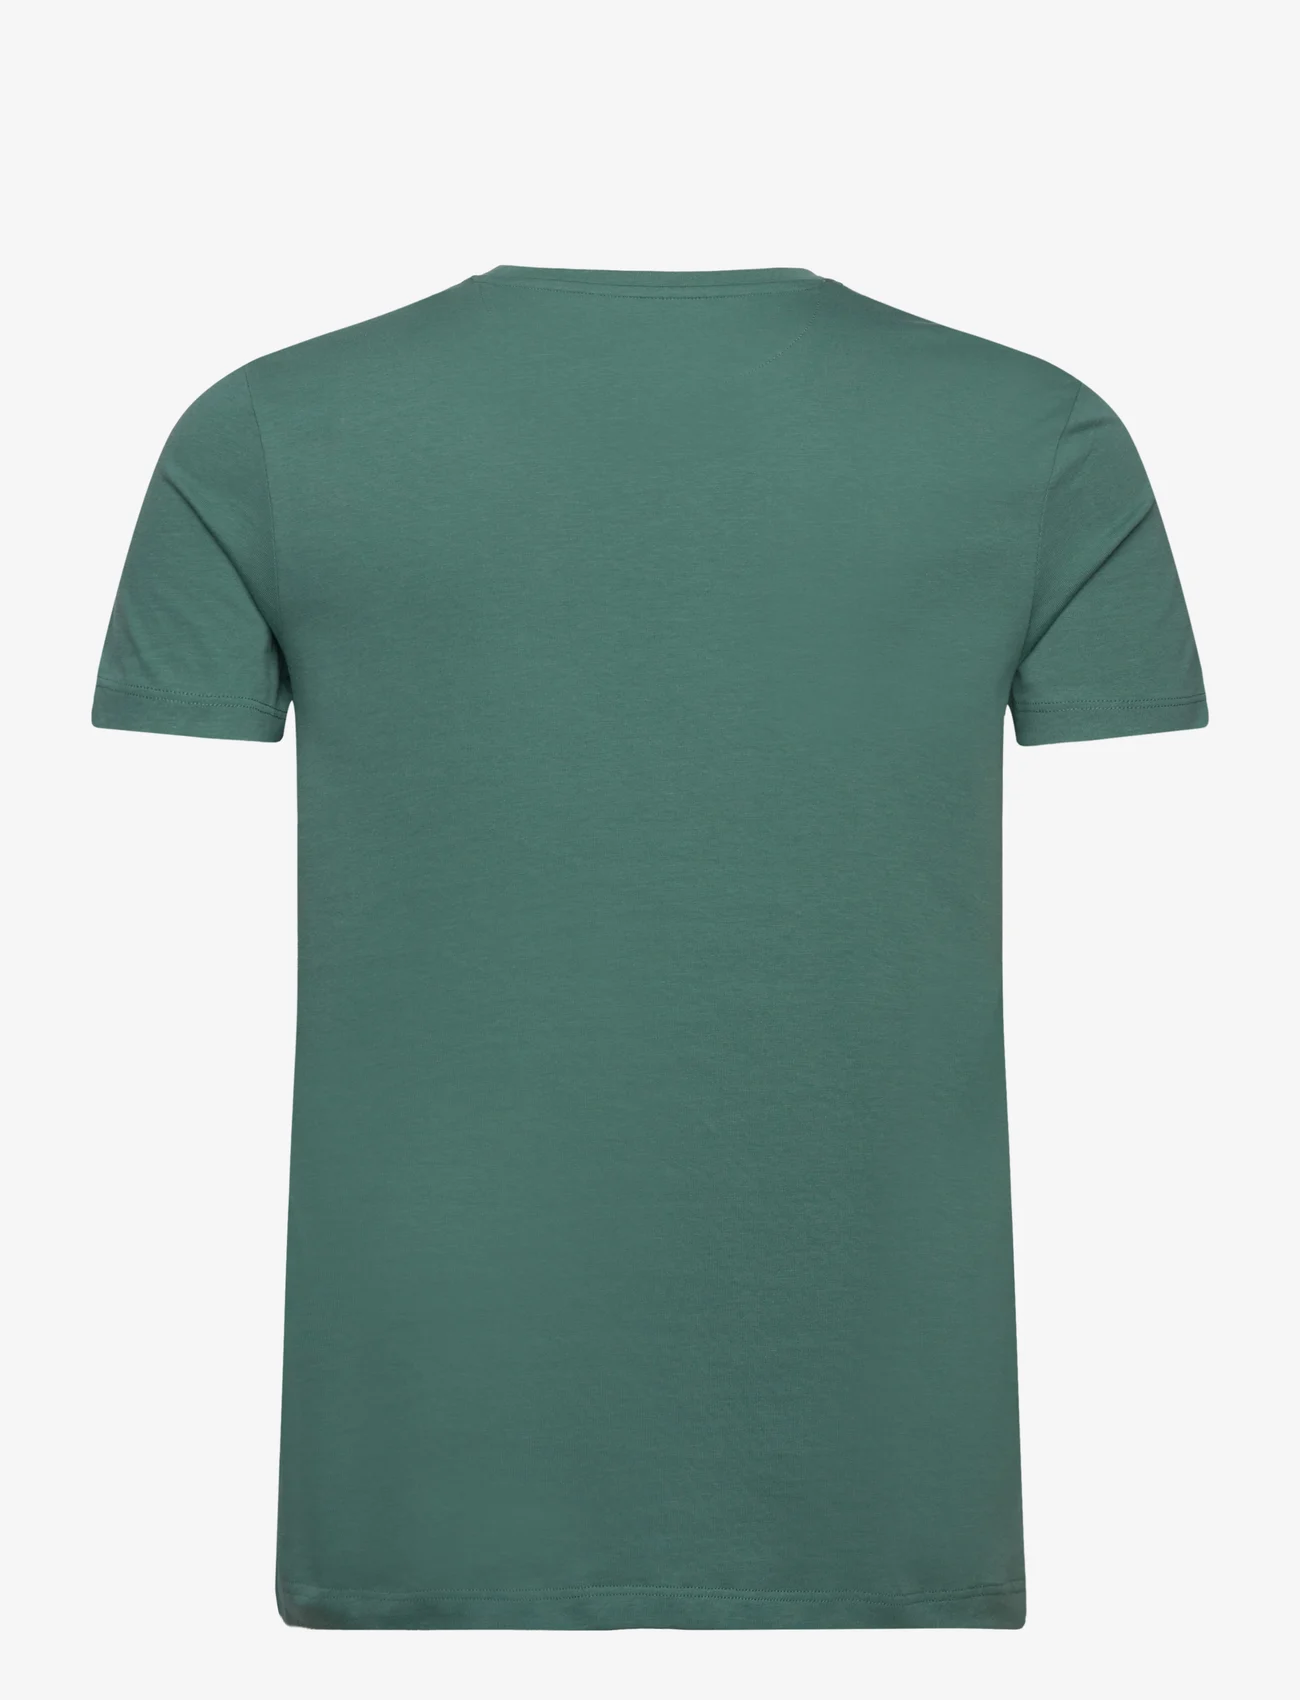 Timberland - DUNSTAN RIVER Chest Pocket Short Sleeve Tee SEA PINE - lowest prices - sea pine - 1